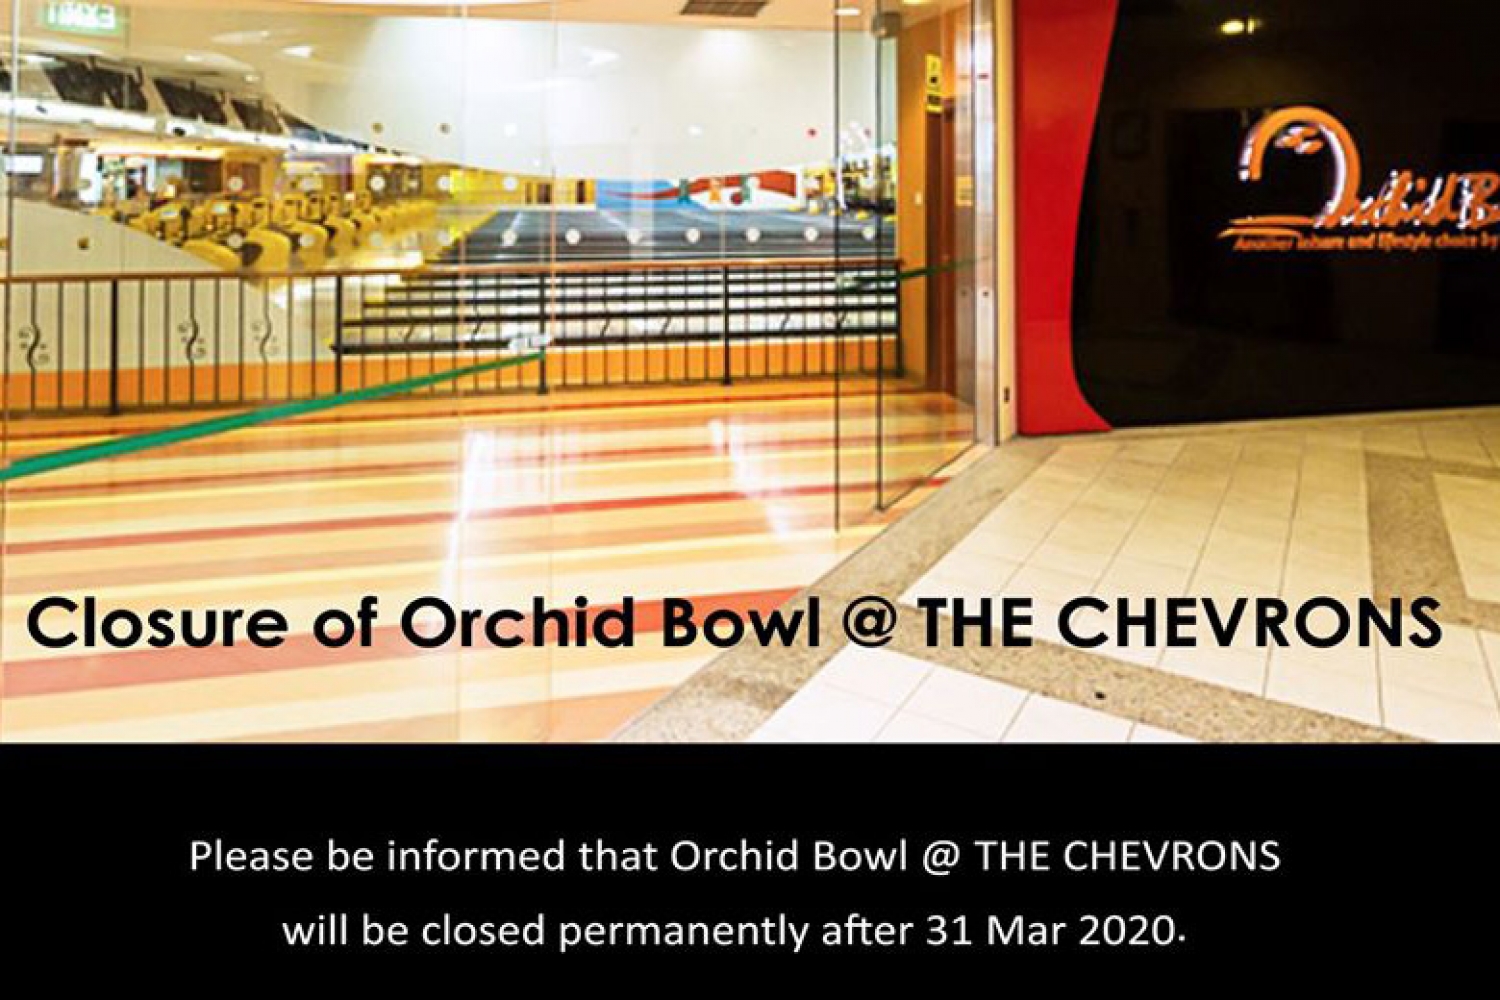 Closure of the Orchid Bowl bowling centre at THE CHEVRONS clubhouse